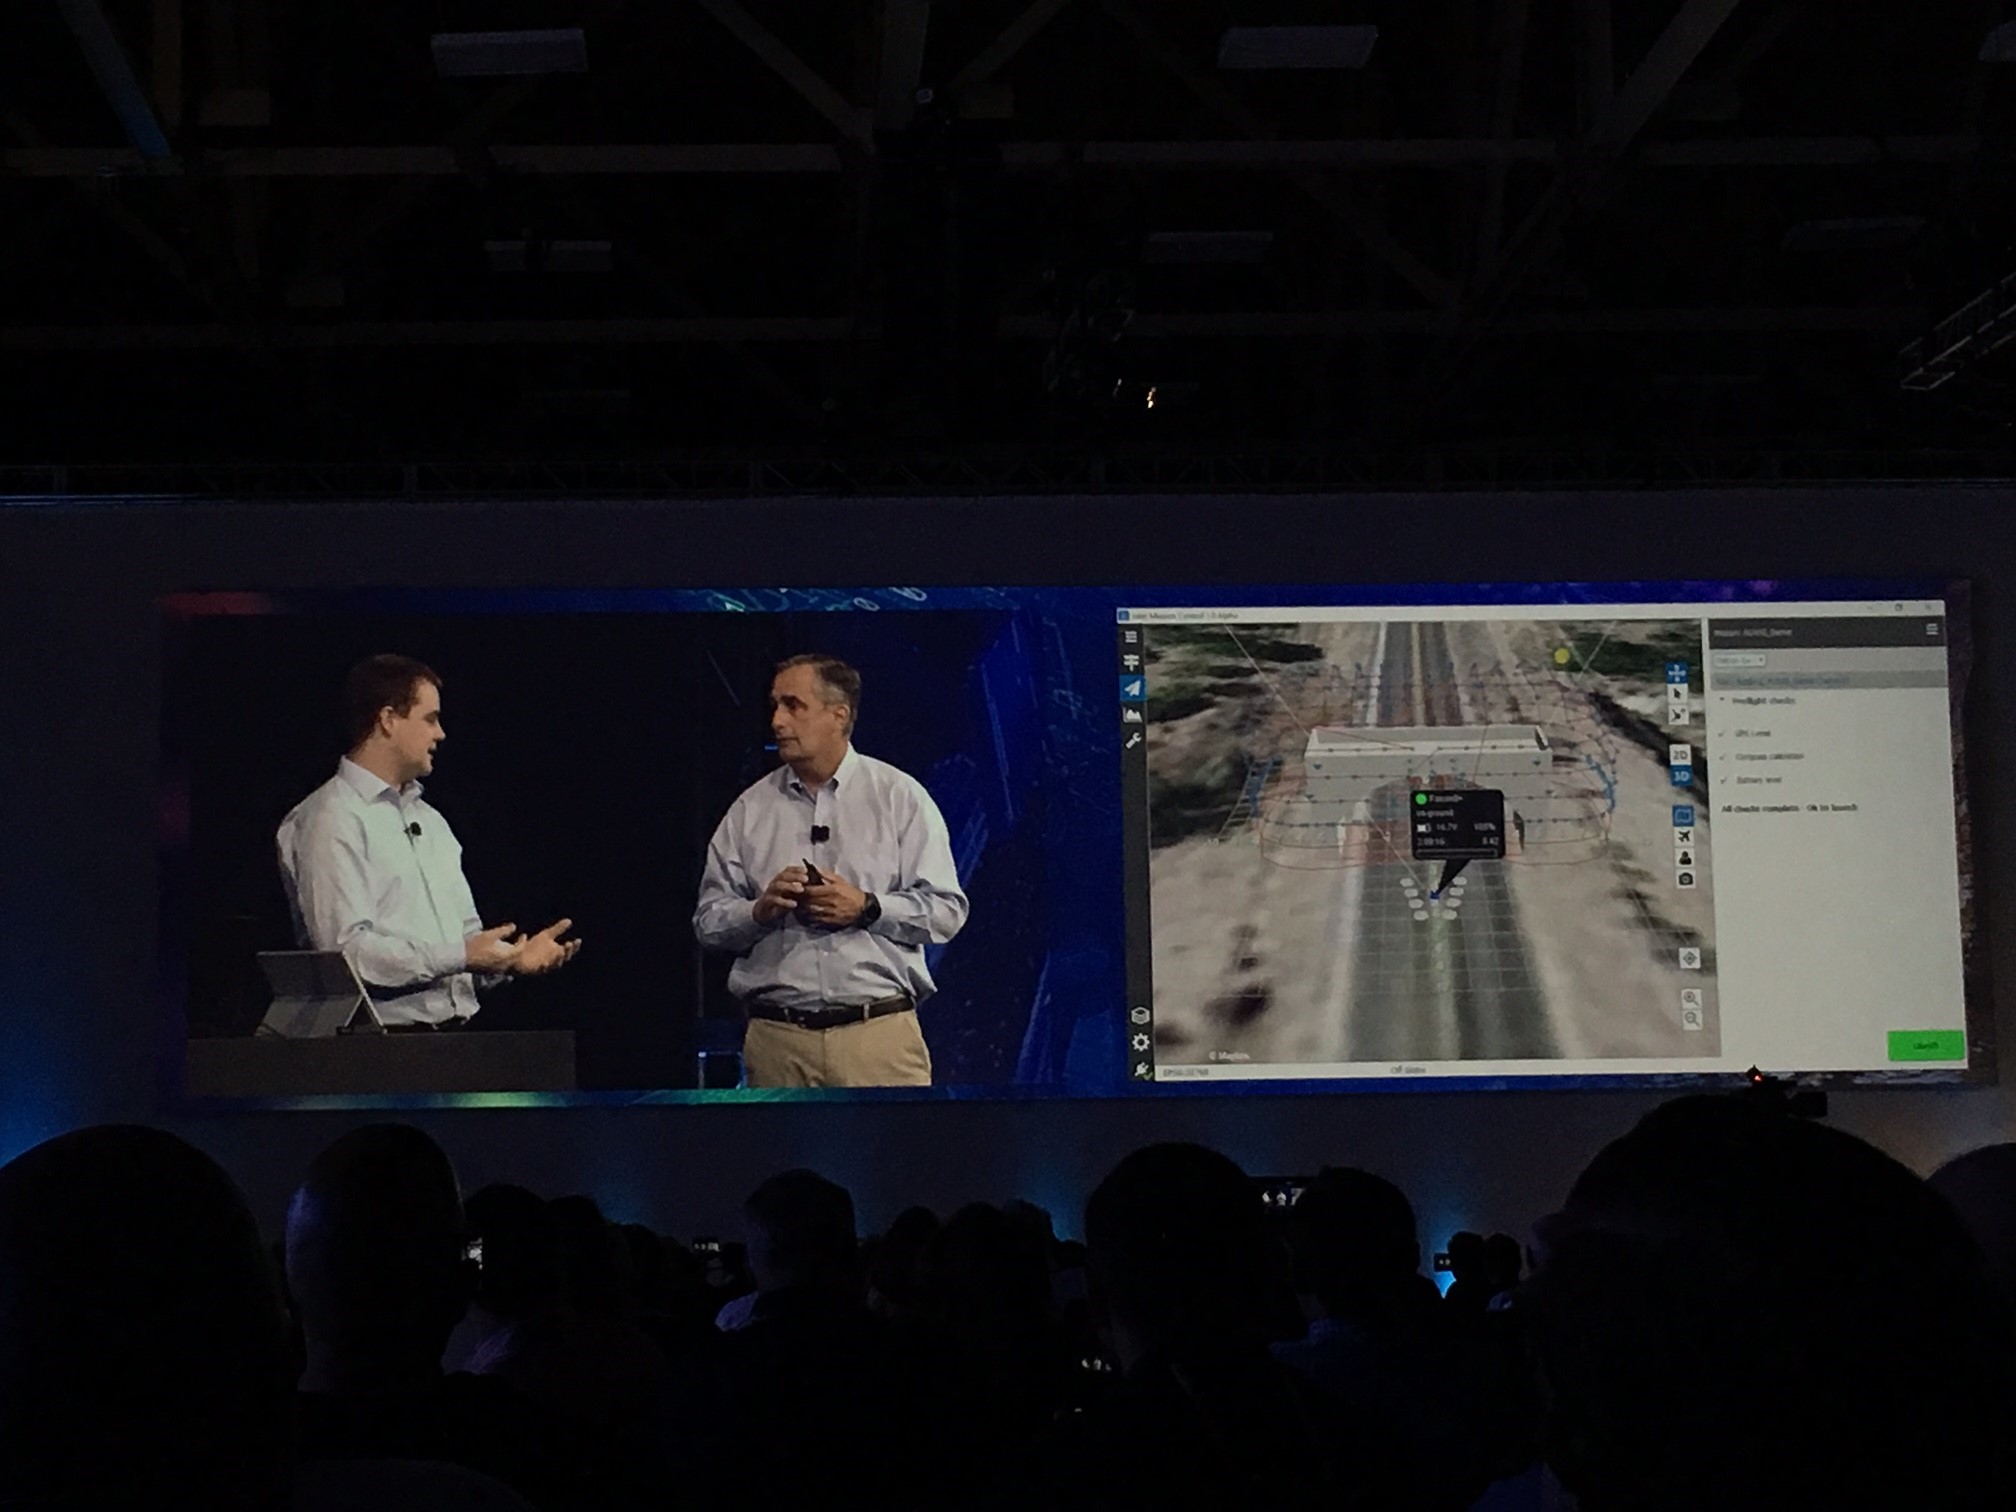 Intel CEO, Brian Krzanich (right) and Mission Control interface to plan Intel Falcon 8+ flight route and inspection image capturing